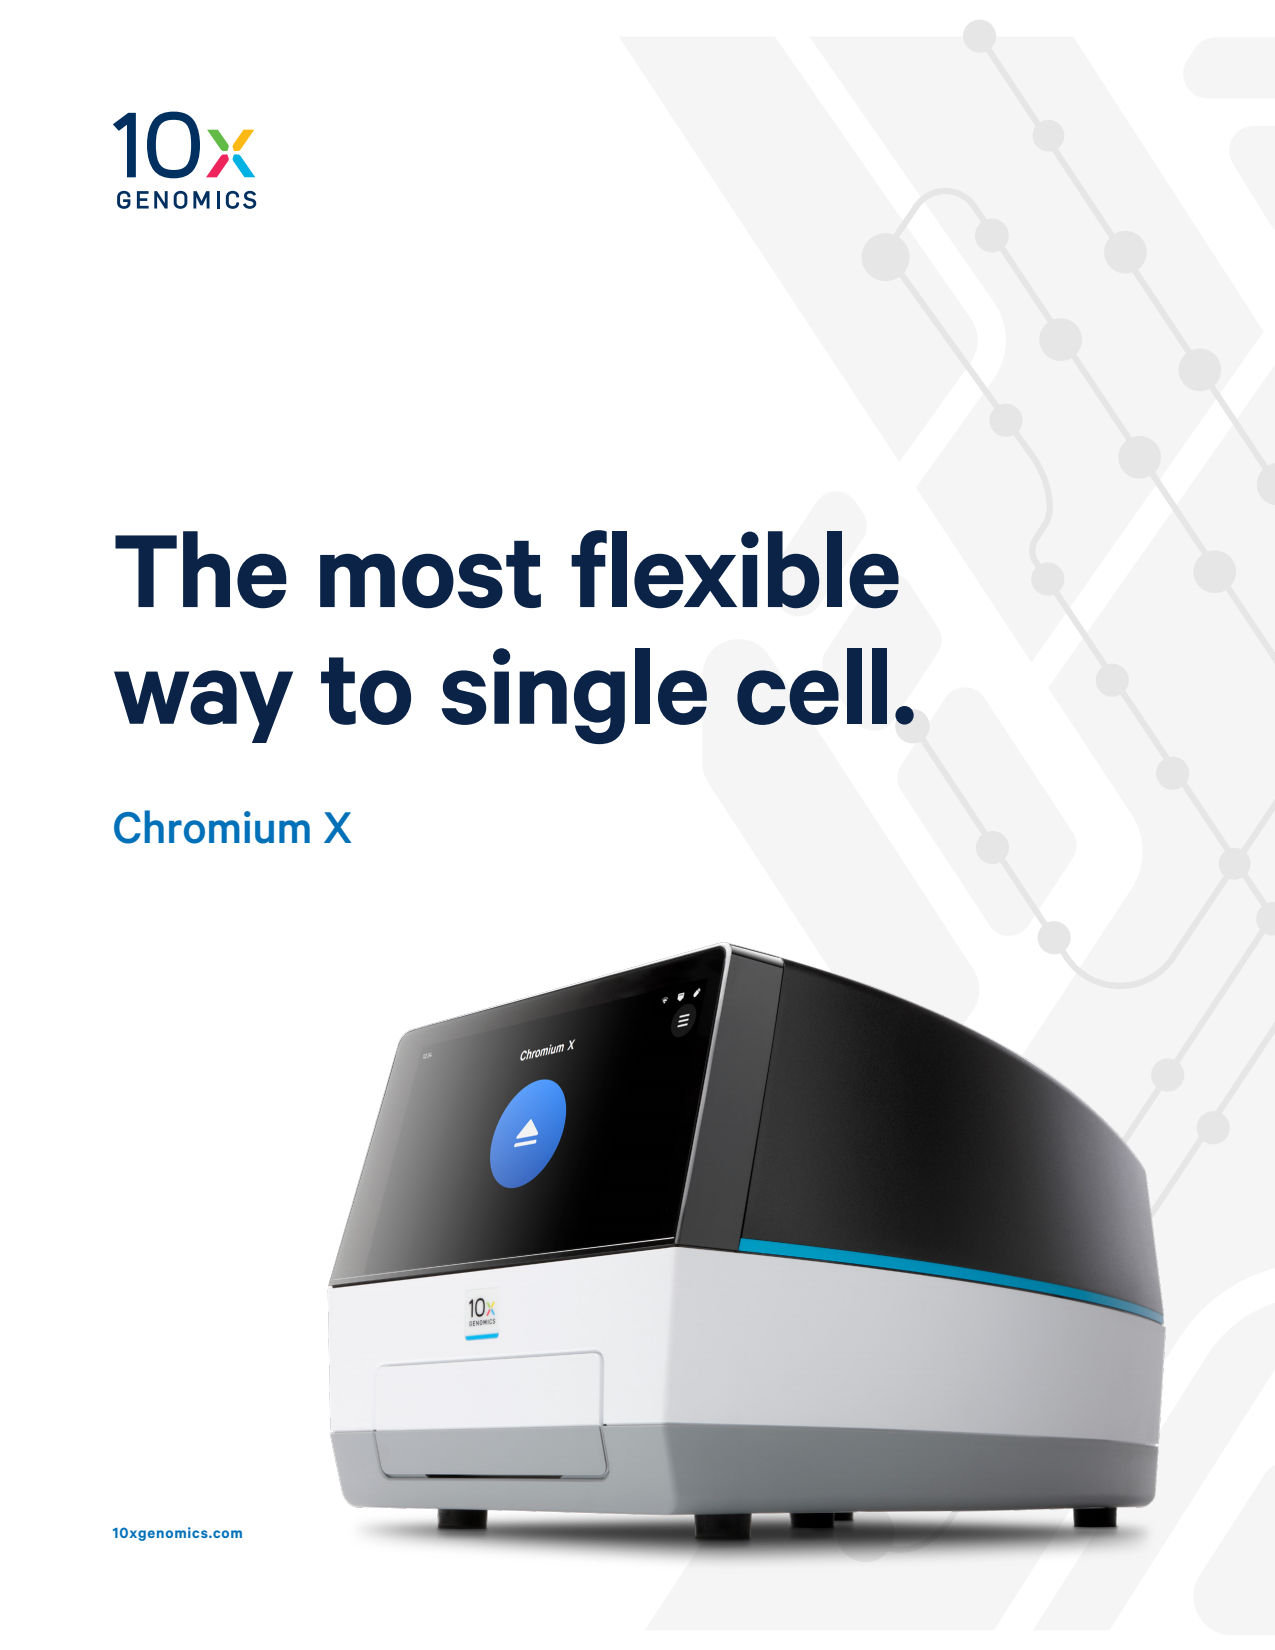 The most flexible way to single cell: Chromium X